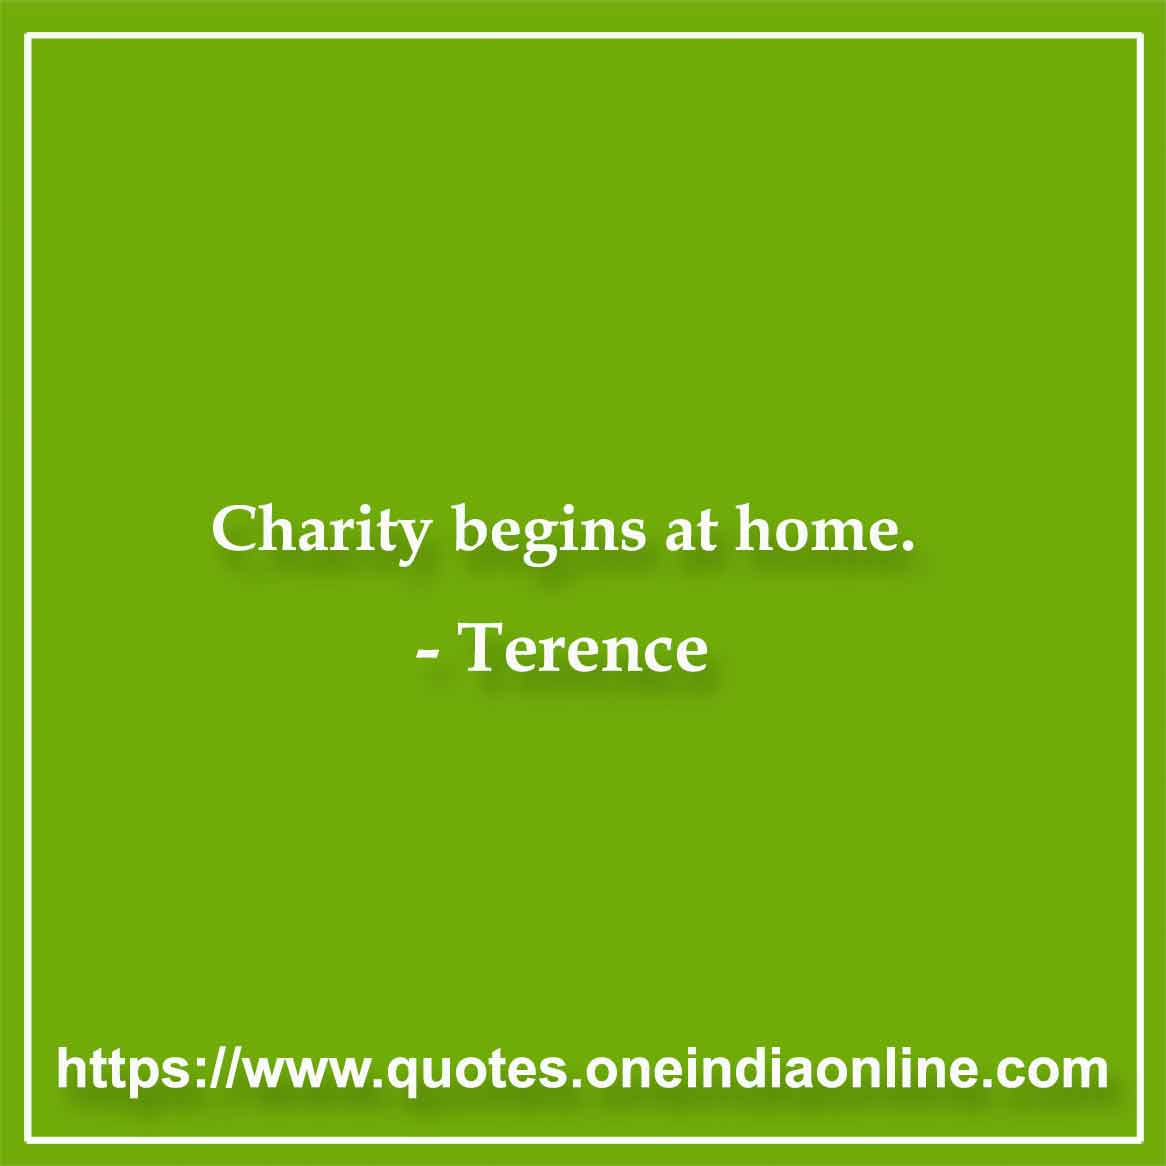 Charity begins at home.

- Terence Quotes